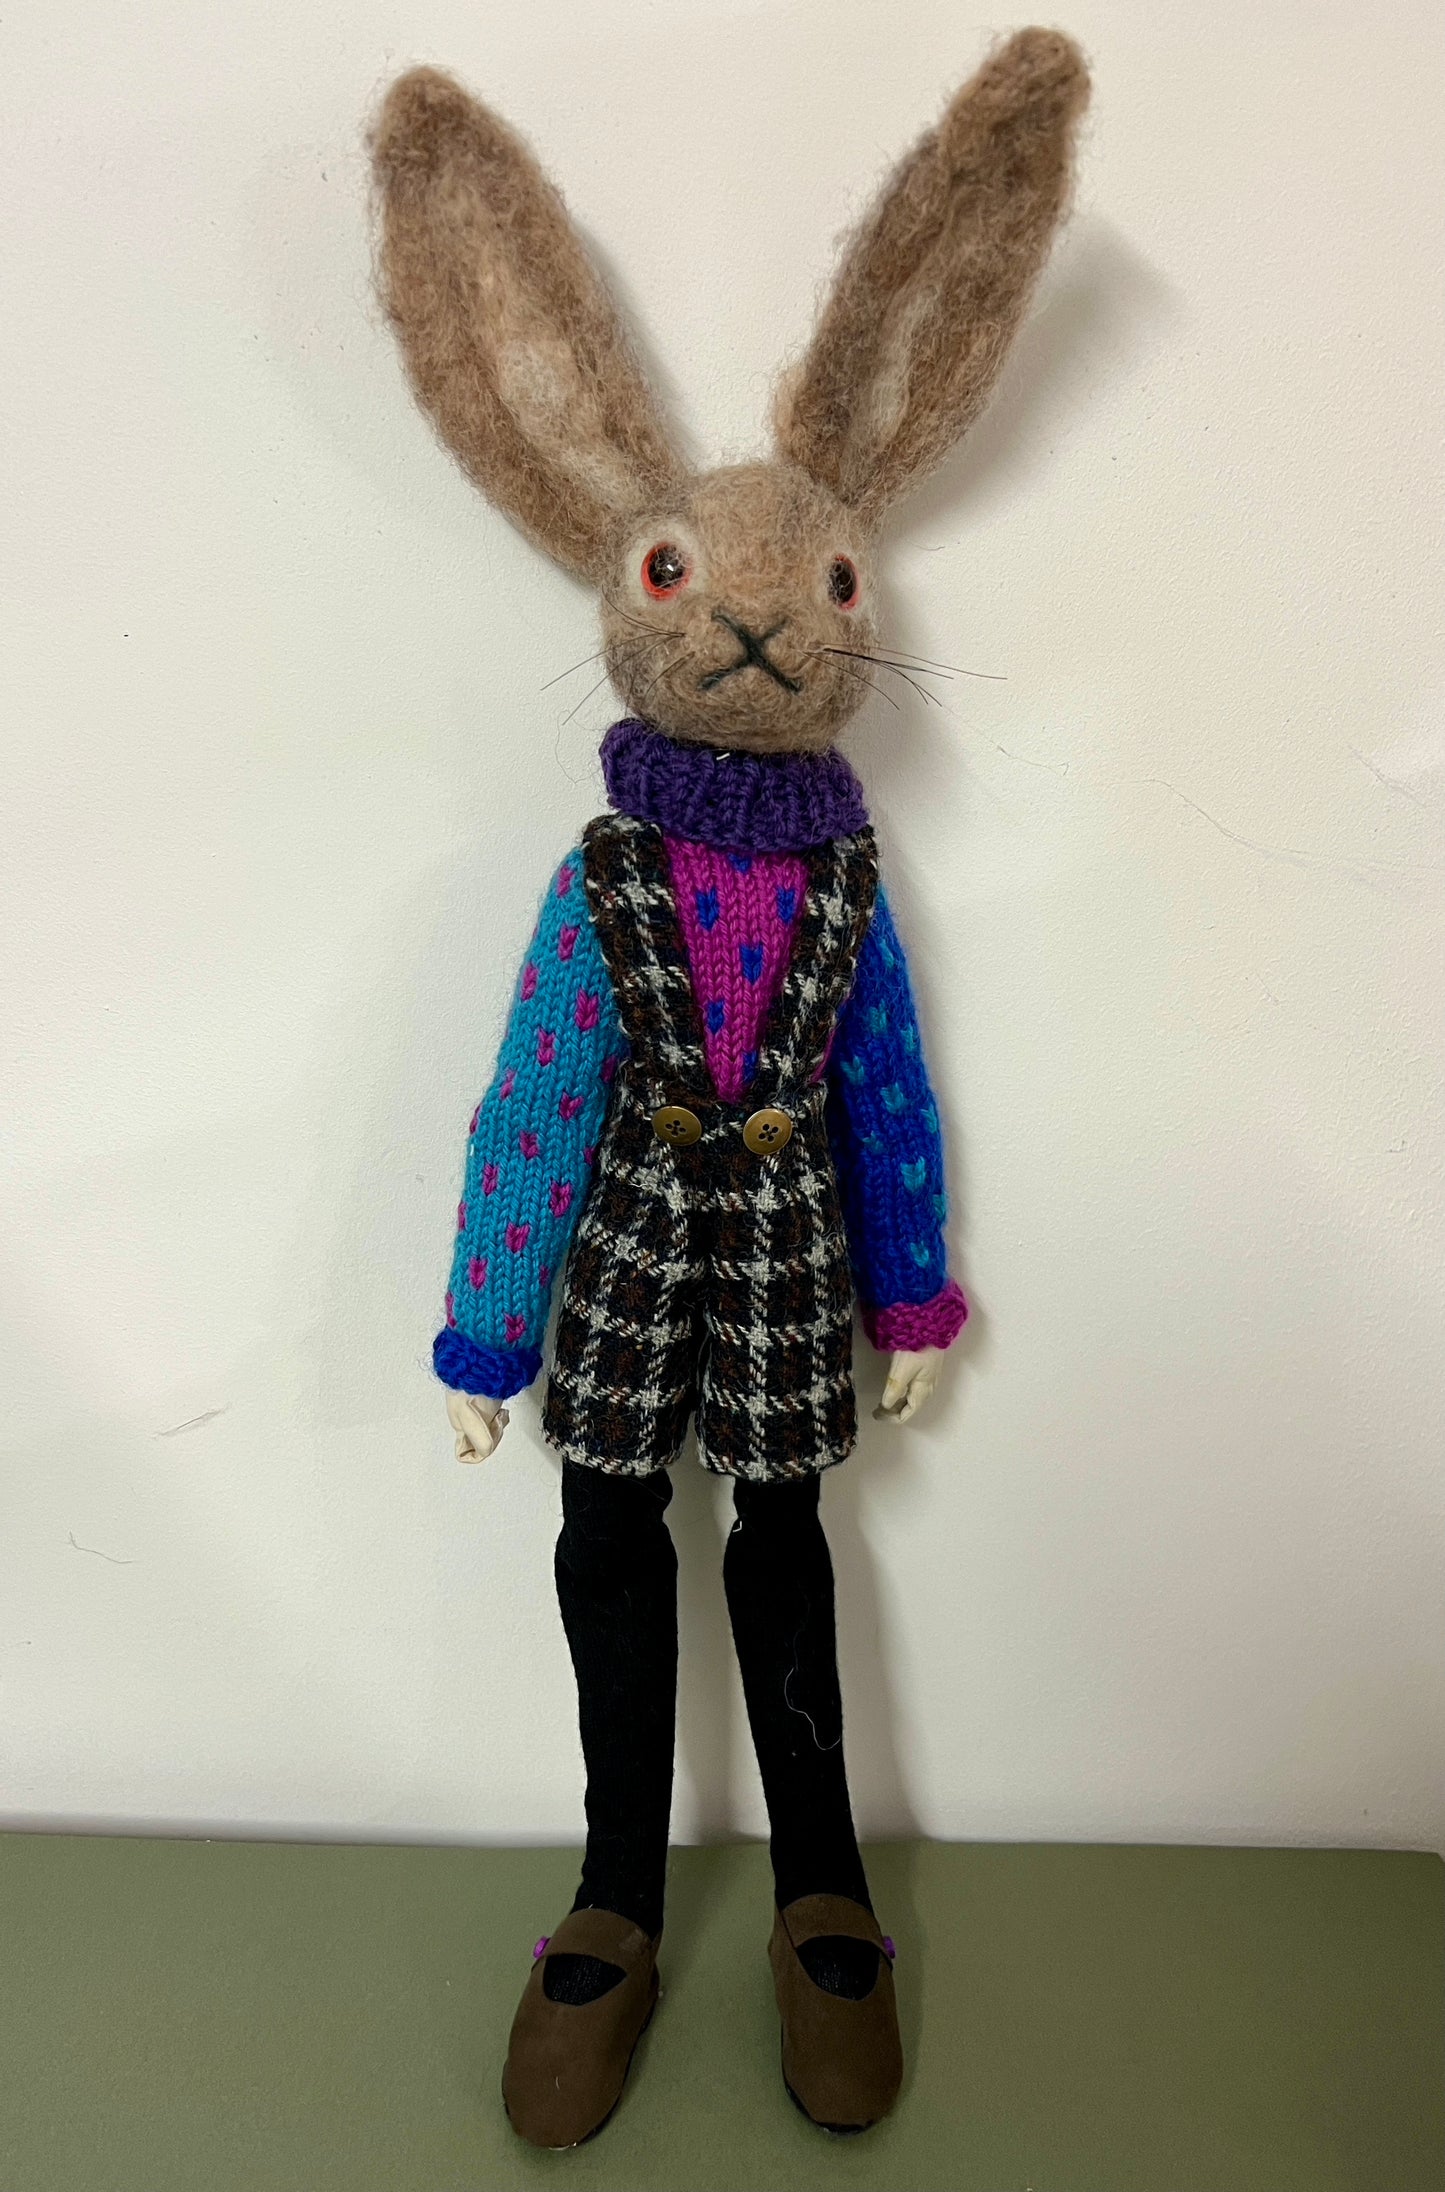 HARRY HARE made by Jan Horrox